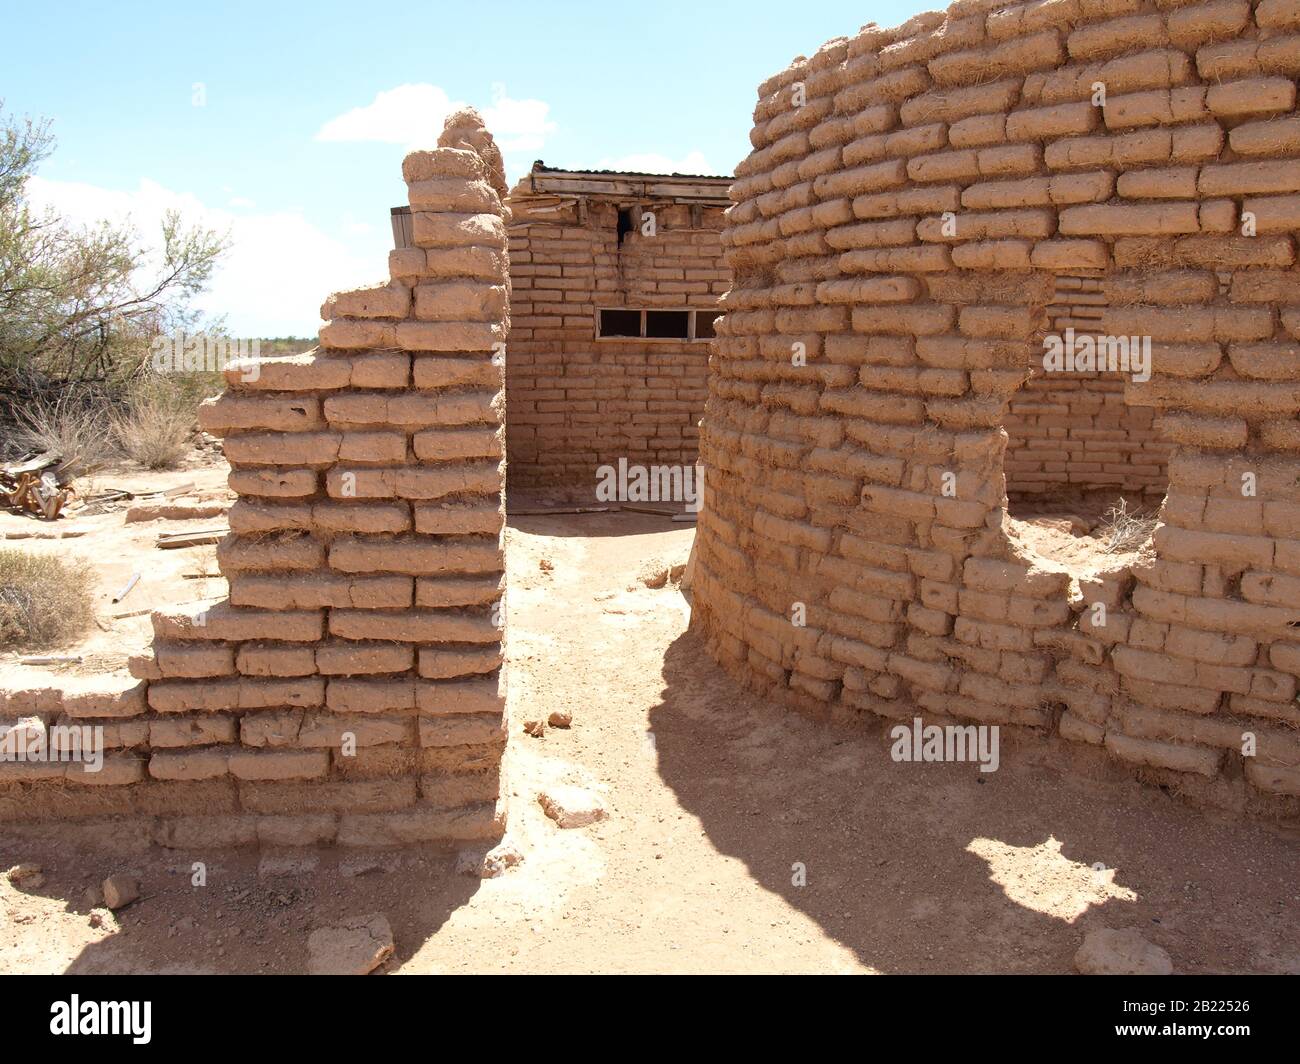 The ghostly remains of an old adobe brick home near Aztec Arizona